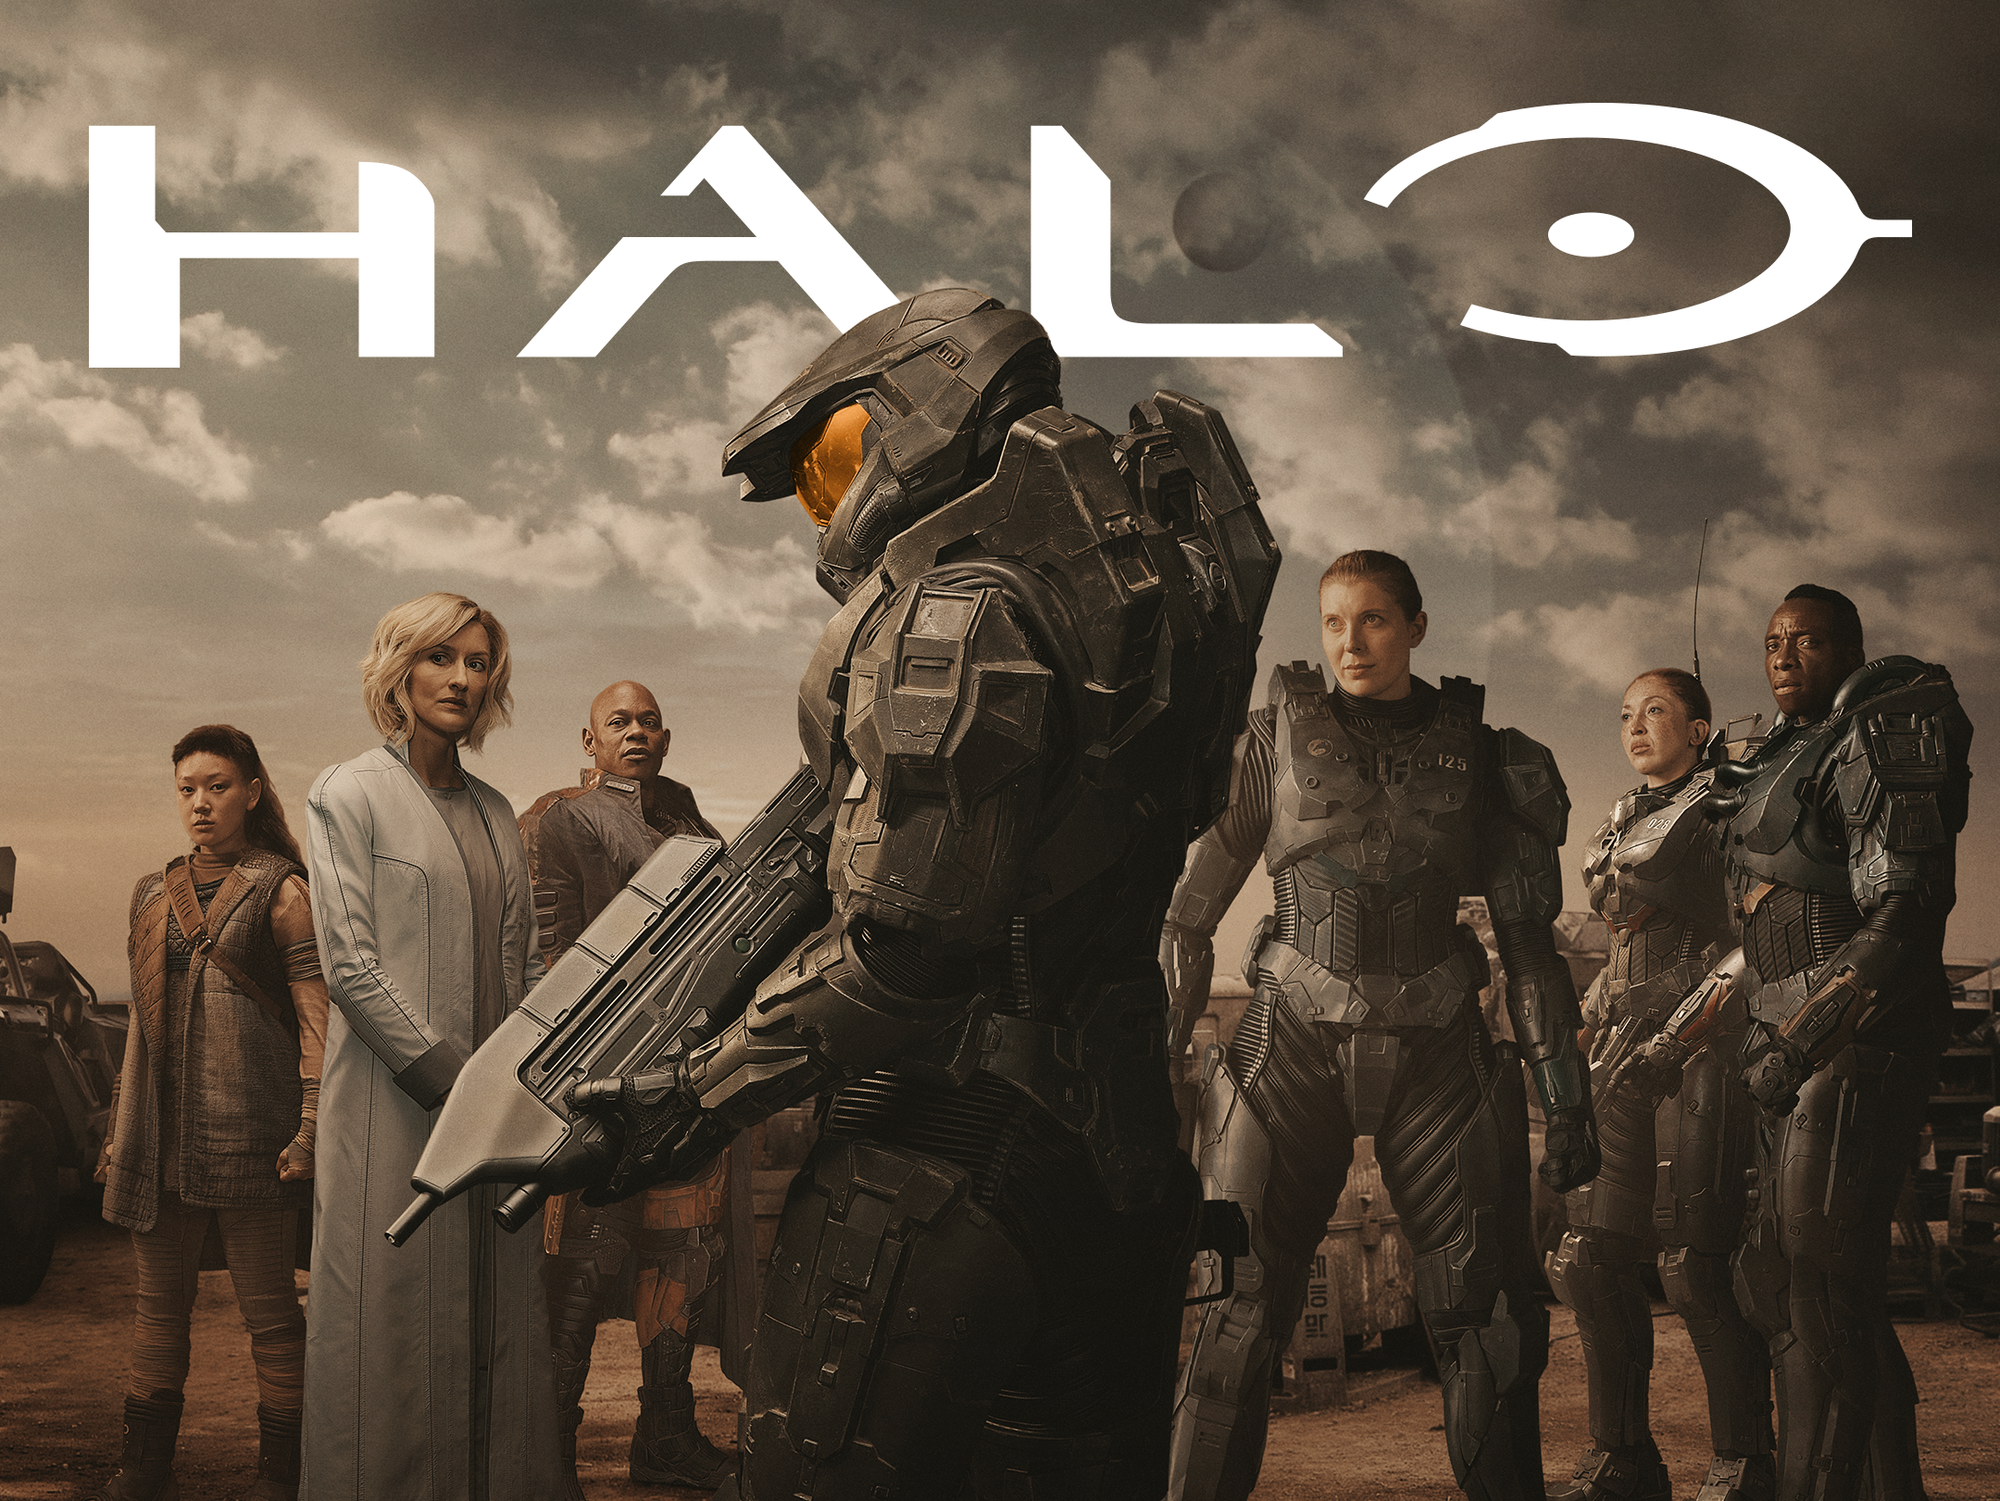 A promotional poster for Halo Season 1 shows Pablo Schreiber as Master Chief in uniform holding an MA5C assault rifle and surrounded by fellow cast members.